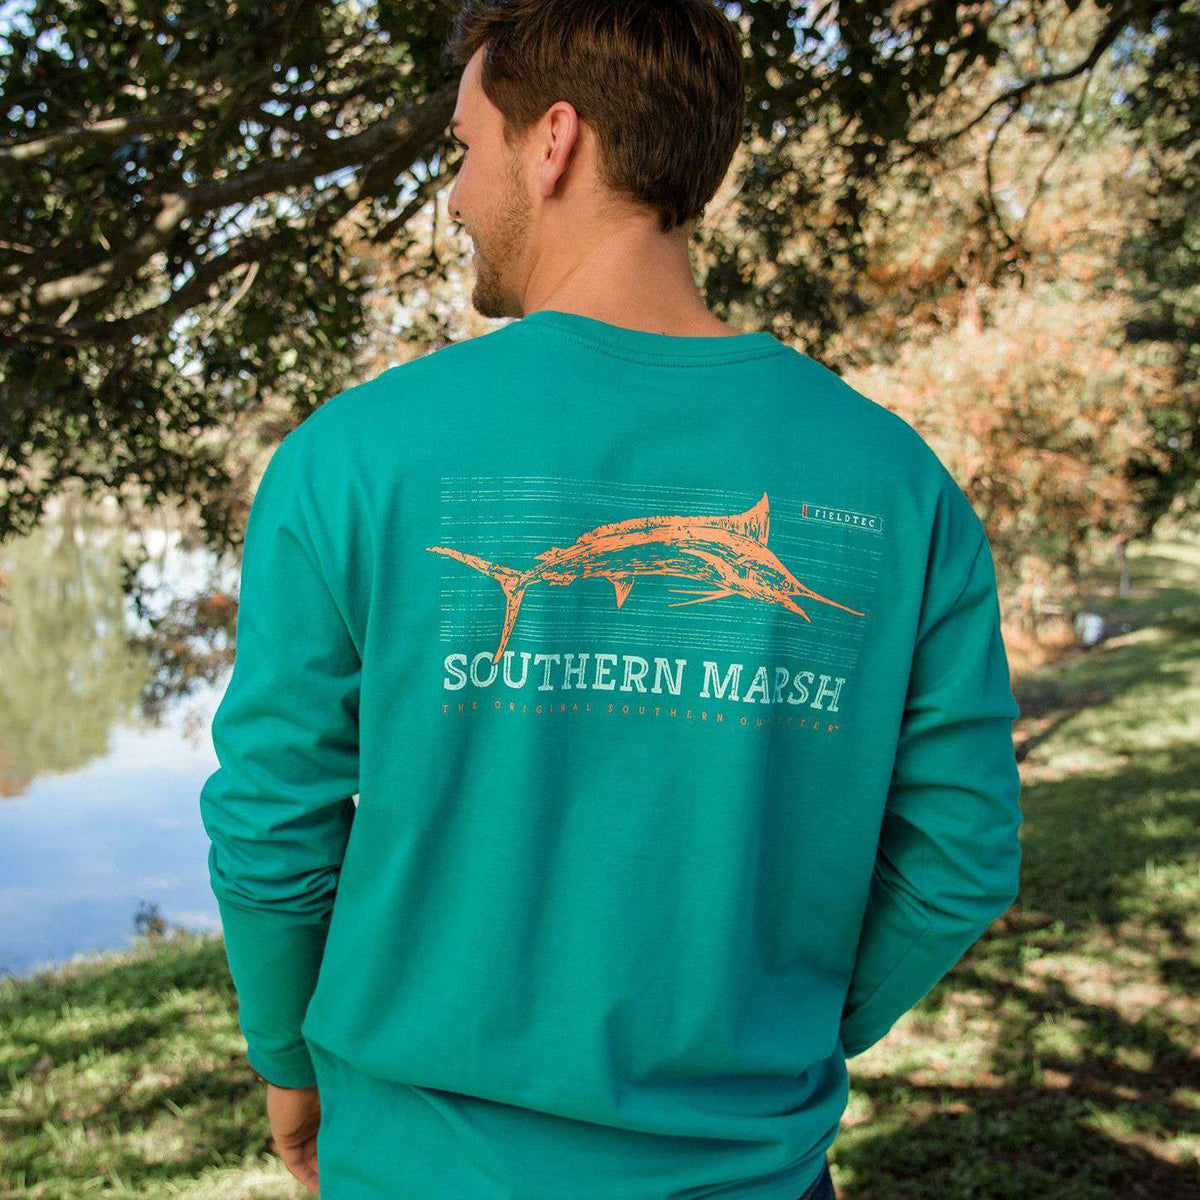 FieldTec Cotton Long Sleeve Marlin Tee in Teal by Southern Marsh - Country Club Prep